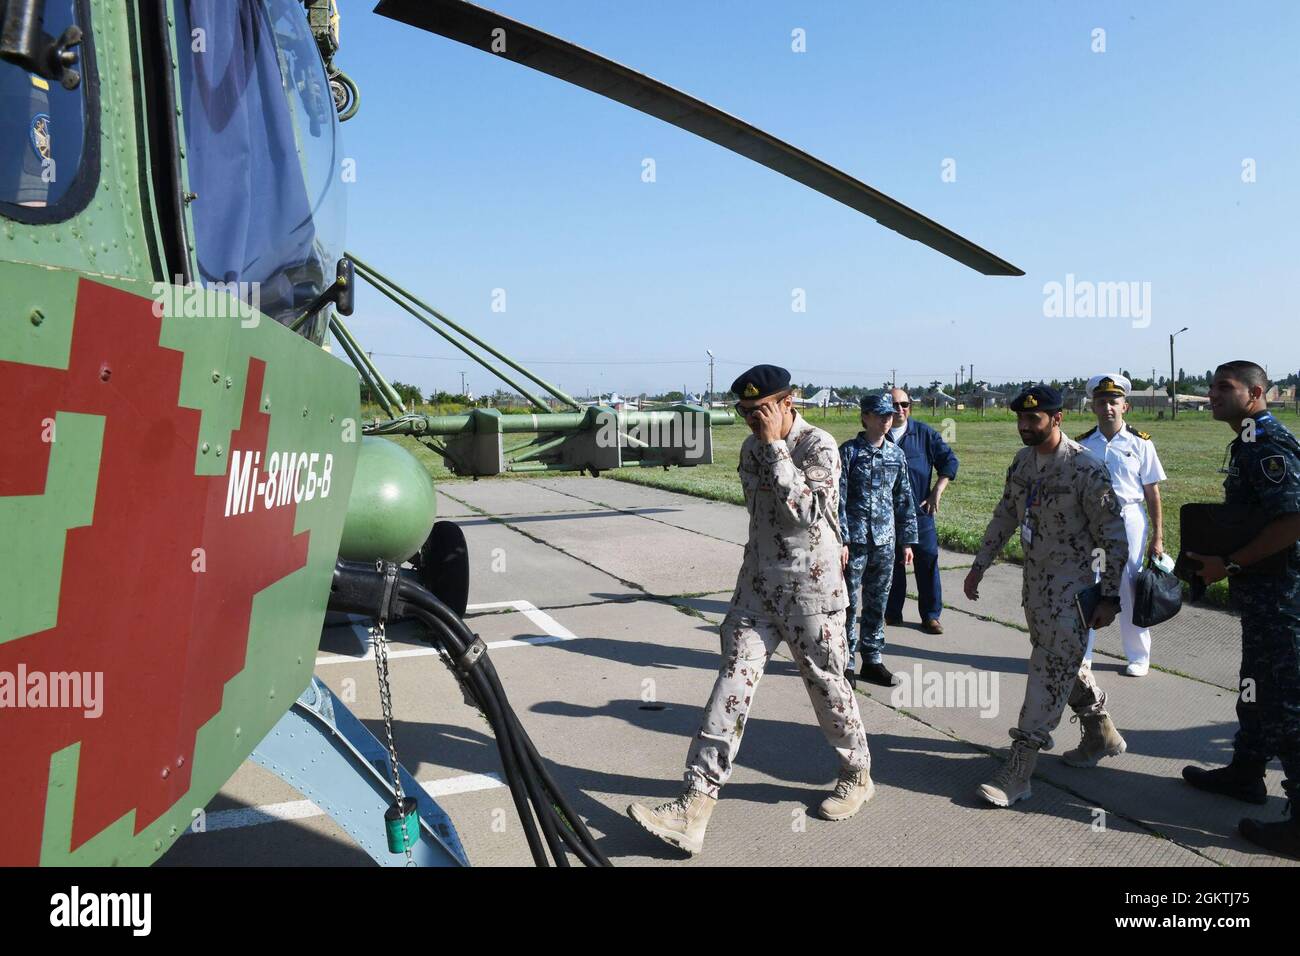 210630-N-VP310-0022  ODESA, Ukraine (June 30, 2021) Egyptian, United Arab Emirates, Canadian and Turkish military officers board a Ukrainian Mi-8 Helicopter to attend an air demonstration for Exercise Sea Breeze 2021 Odesa, Ukraine, June 30, 2021. Exercise Sea Breeze is a multinational maritime exercise cohosted by the U.S. Sixth Fleet and the Ukrainian Navy since 1997. Sea Breeze 2021 is designed to enhance interoperability of participating nations and strengthens maritime security and peace in the region. Stock Photo